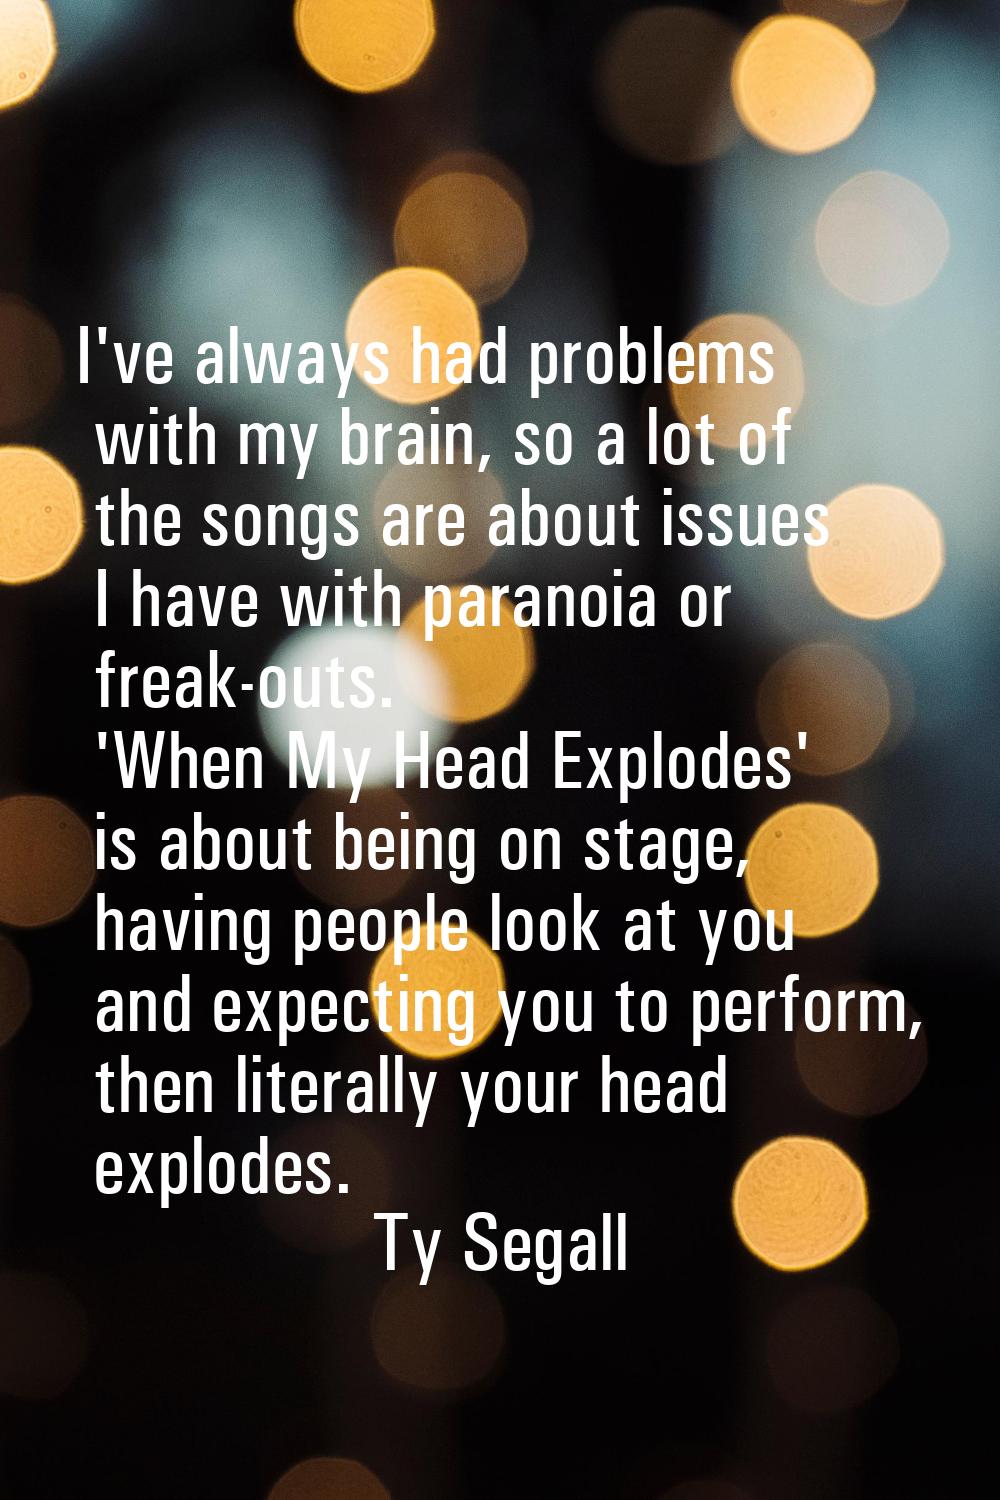 I've always had problems with my brain, so a lot of the songs are about issues I have with paranoia